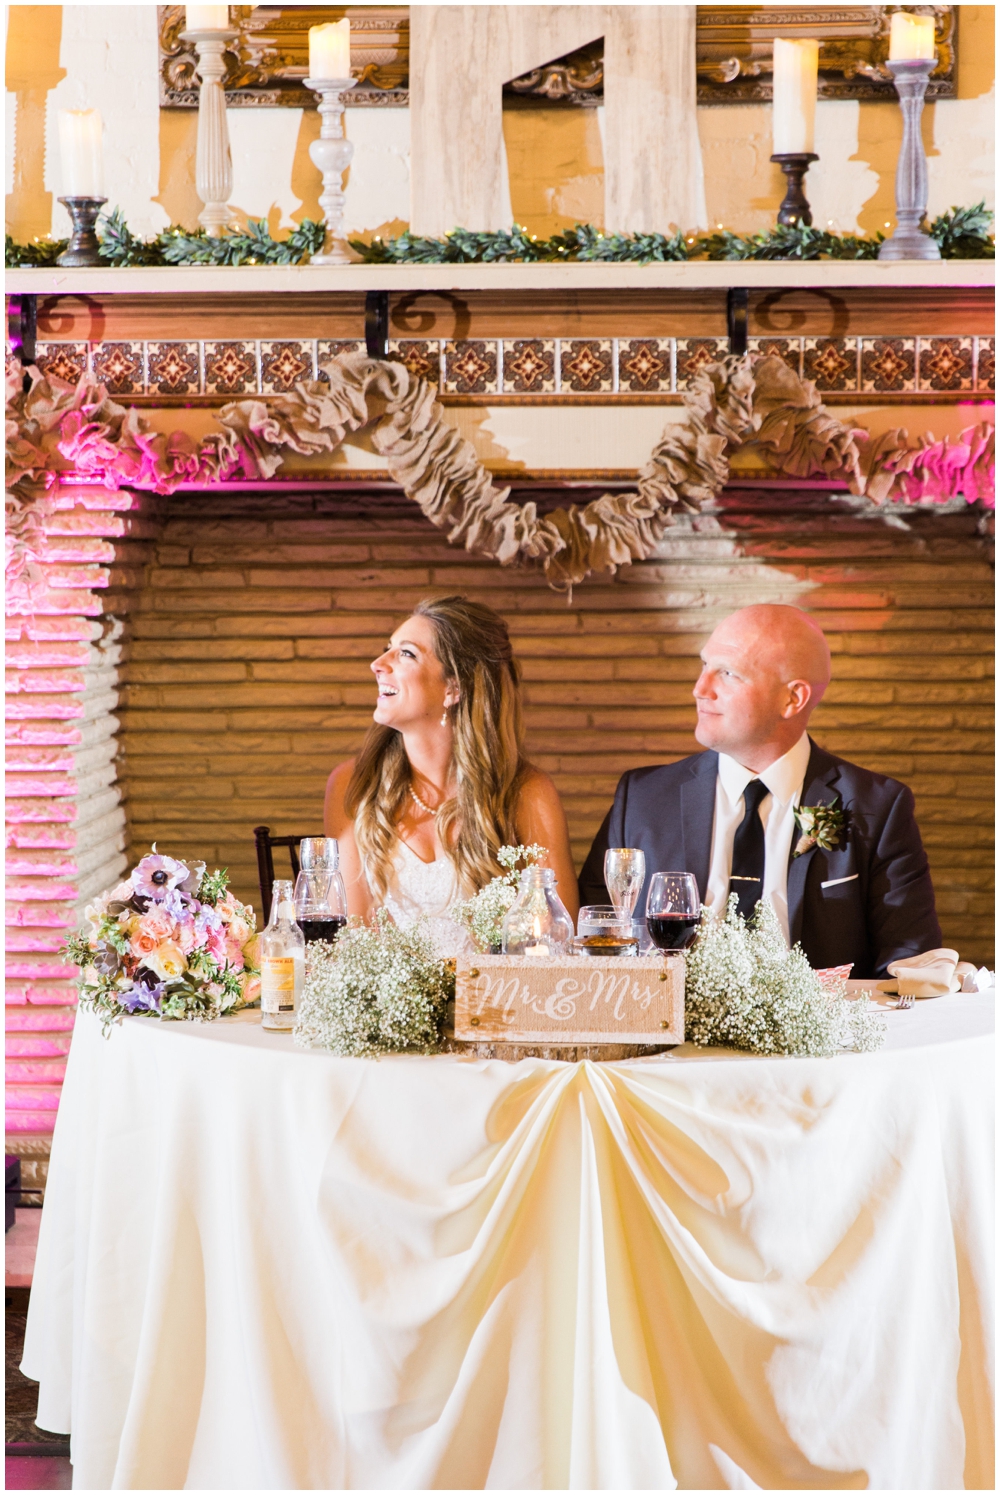 Rustic decor for sweetheart table- bride and groom during toast